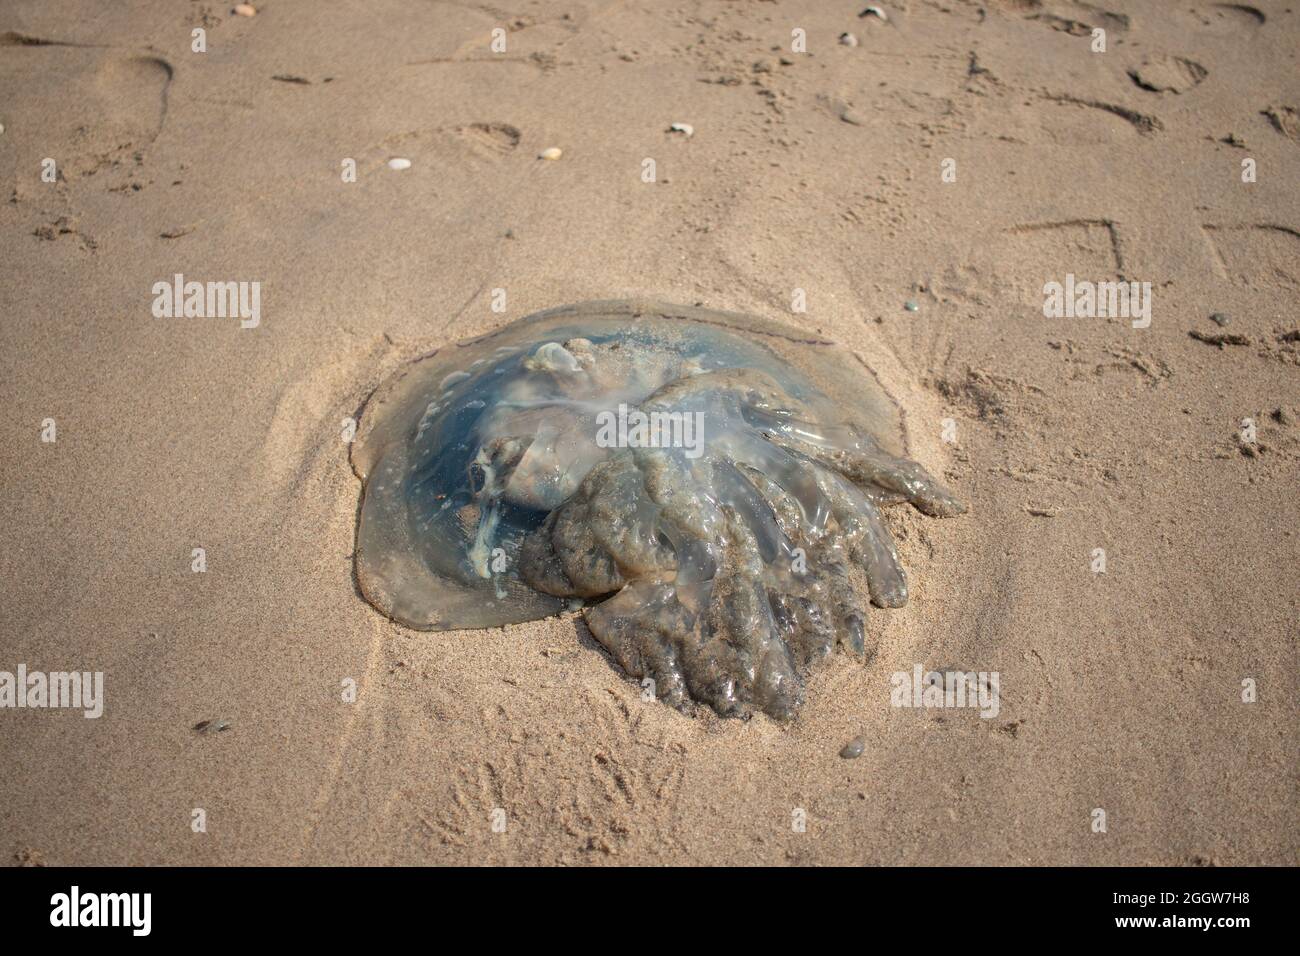 A big washed up jellyfish at the Dutch coast (Kijkduin, The Hague, The Netherlands) Stock Photo